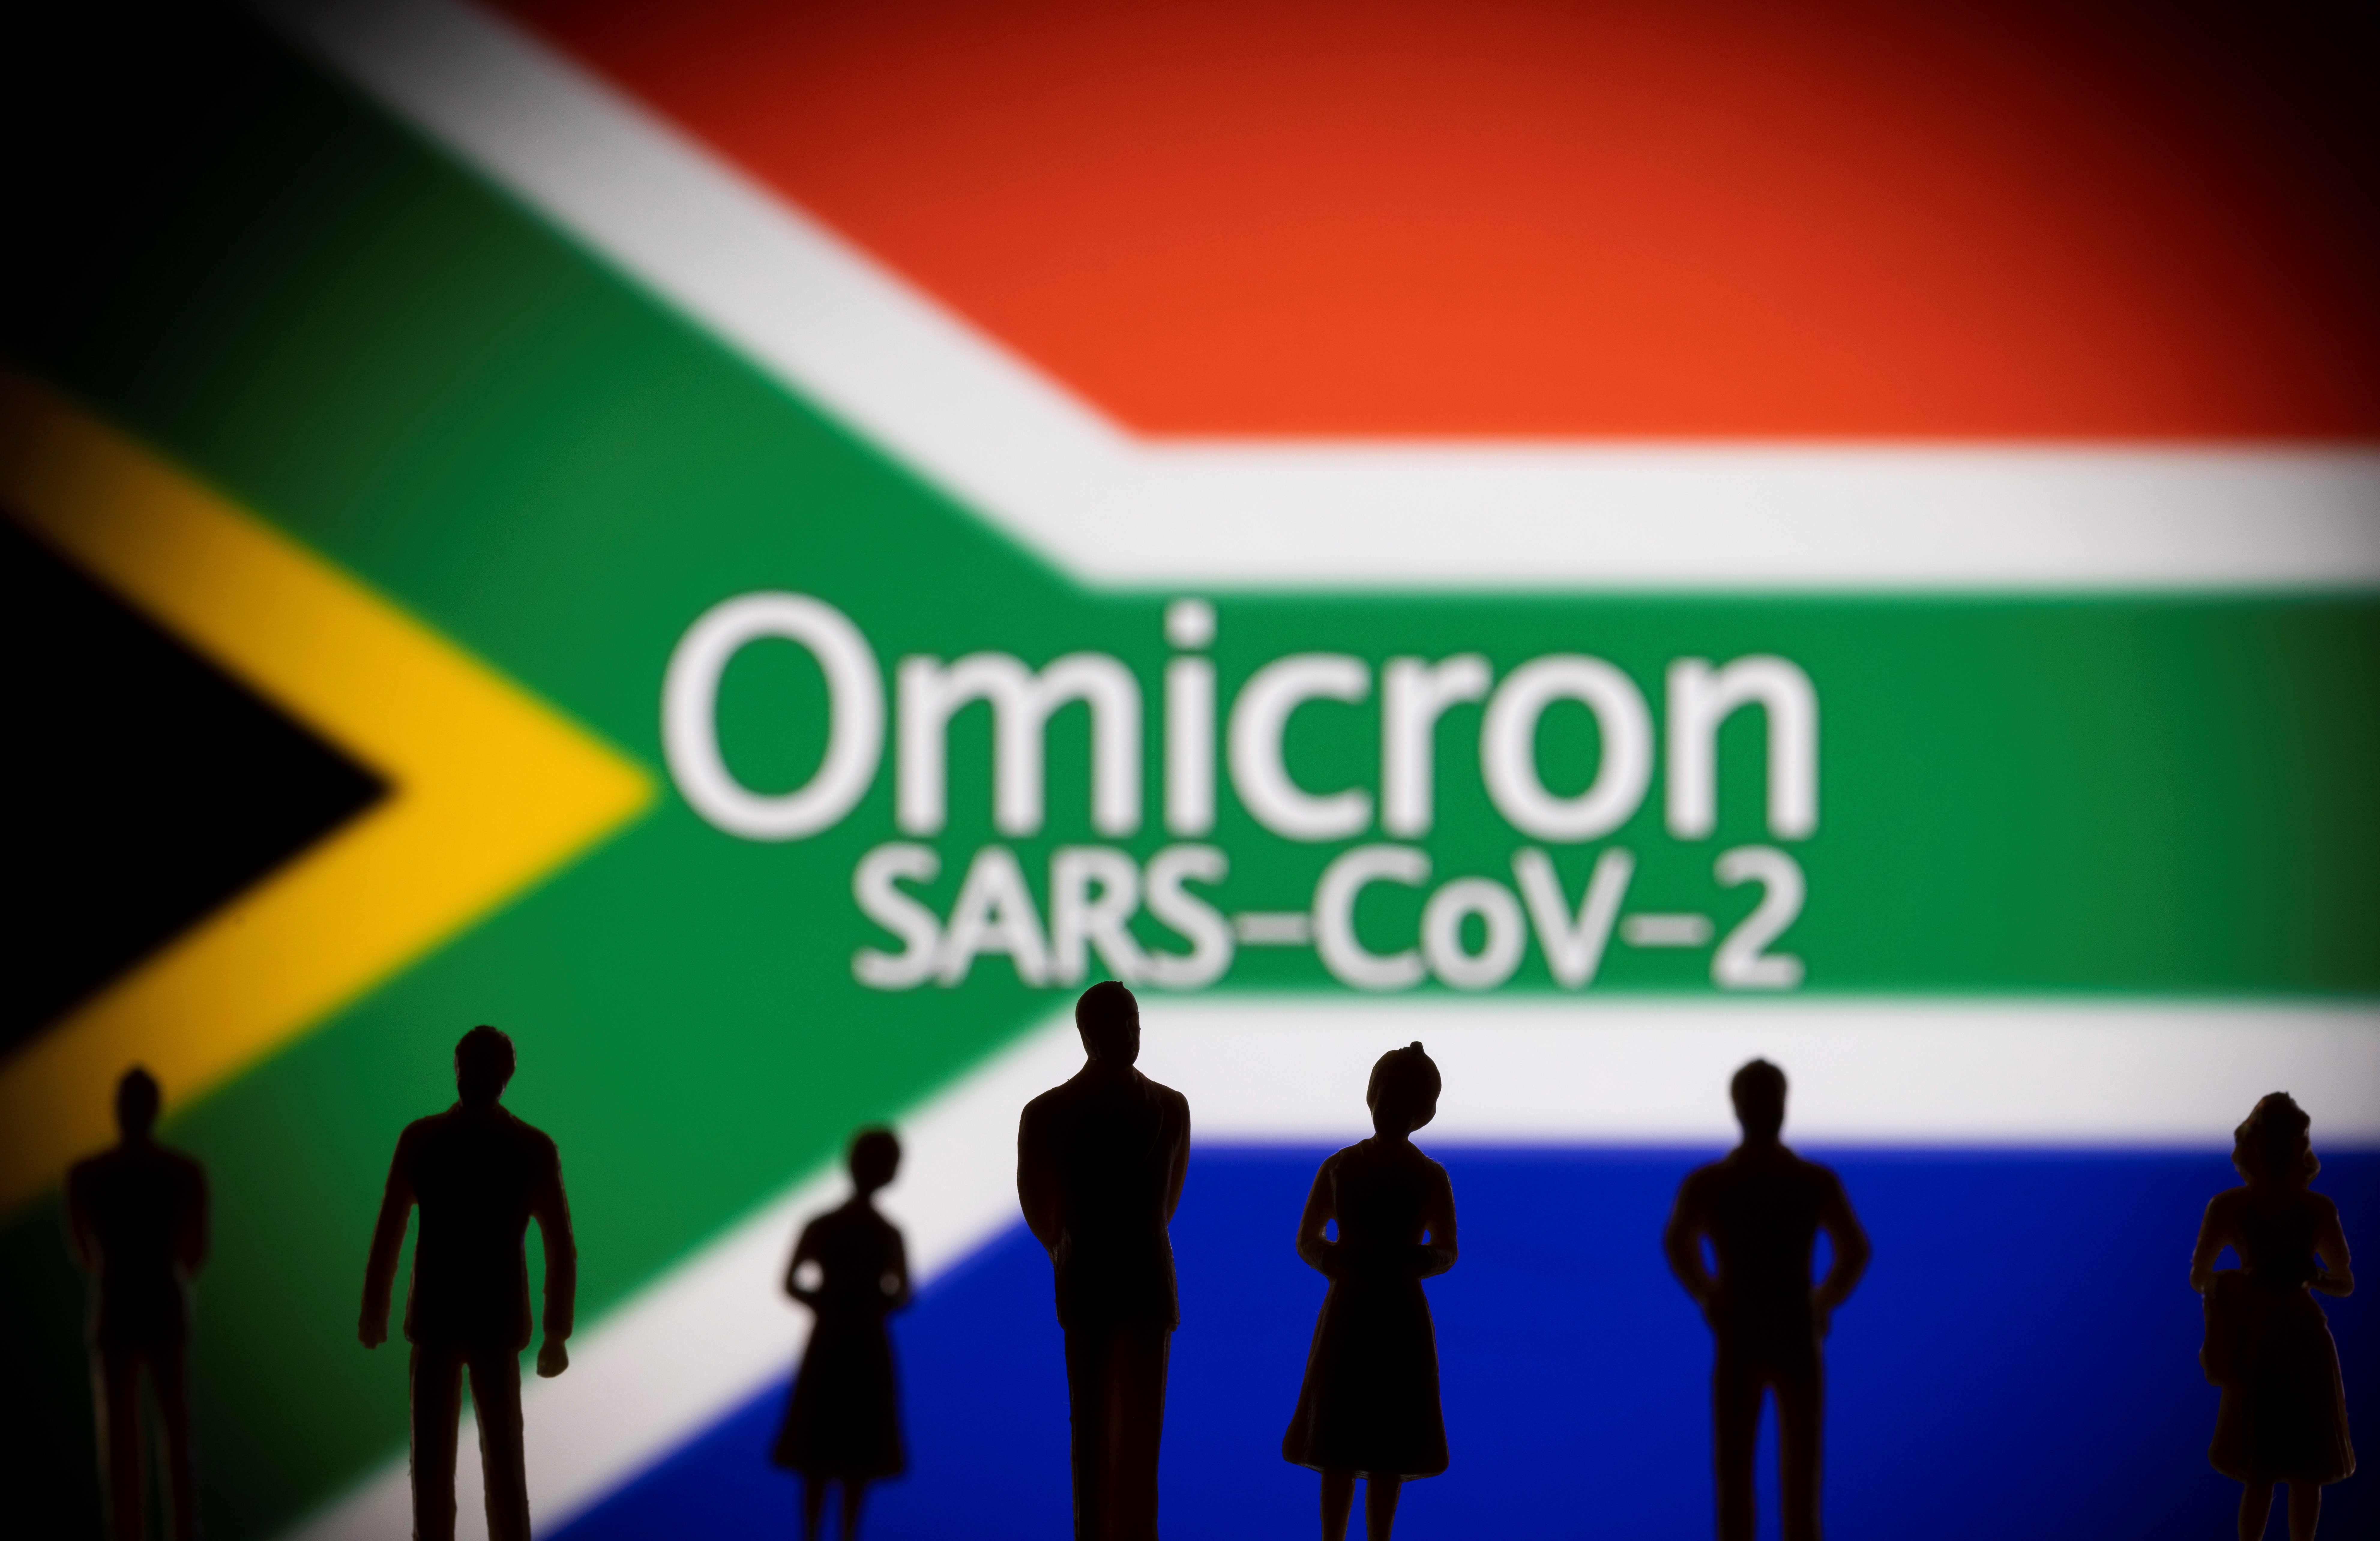 Small toy figures are seen in front of a displayed South Africa flag and words 